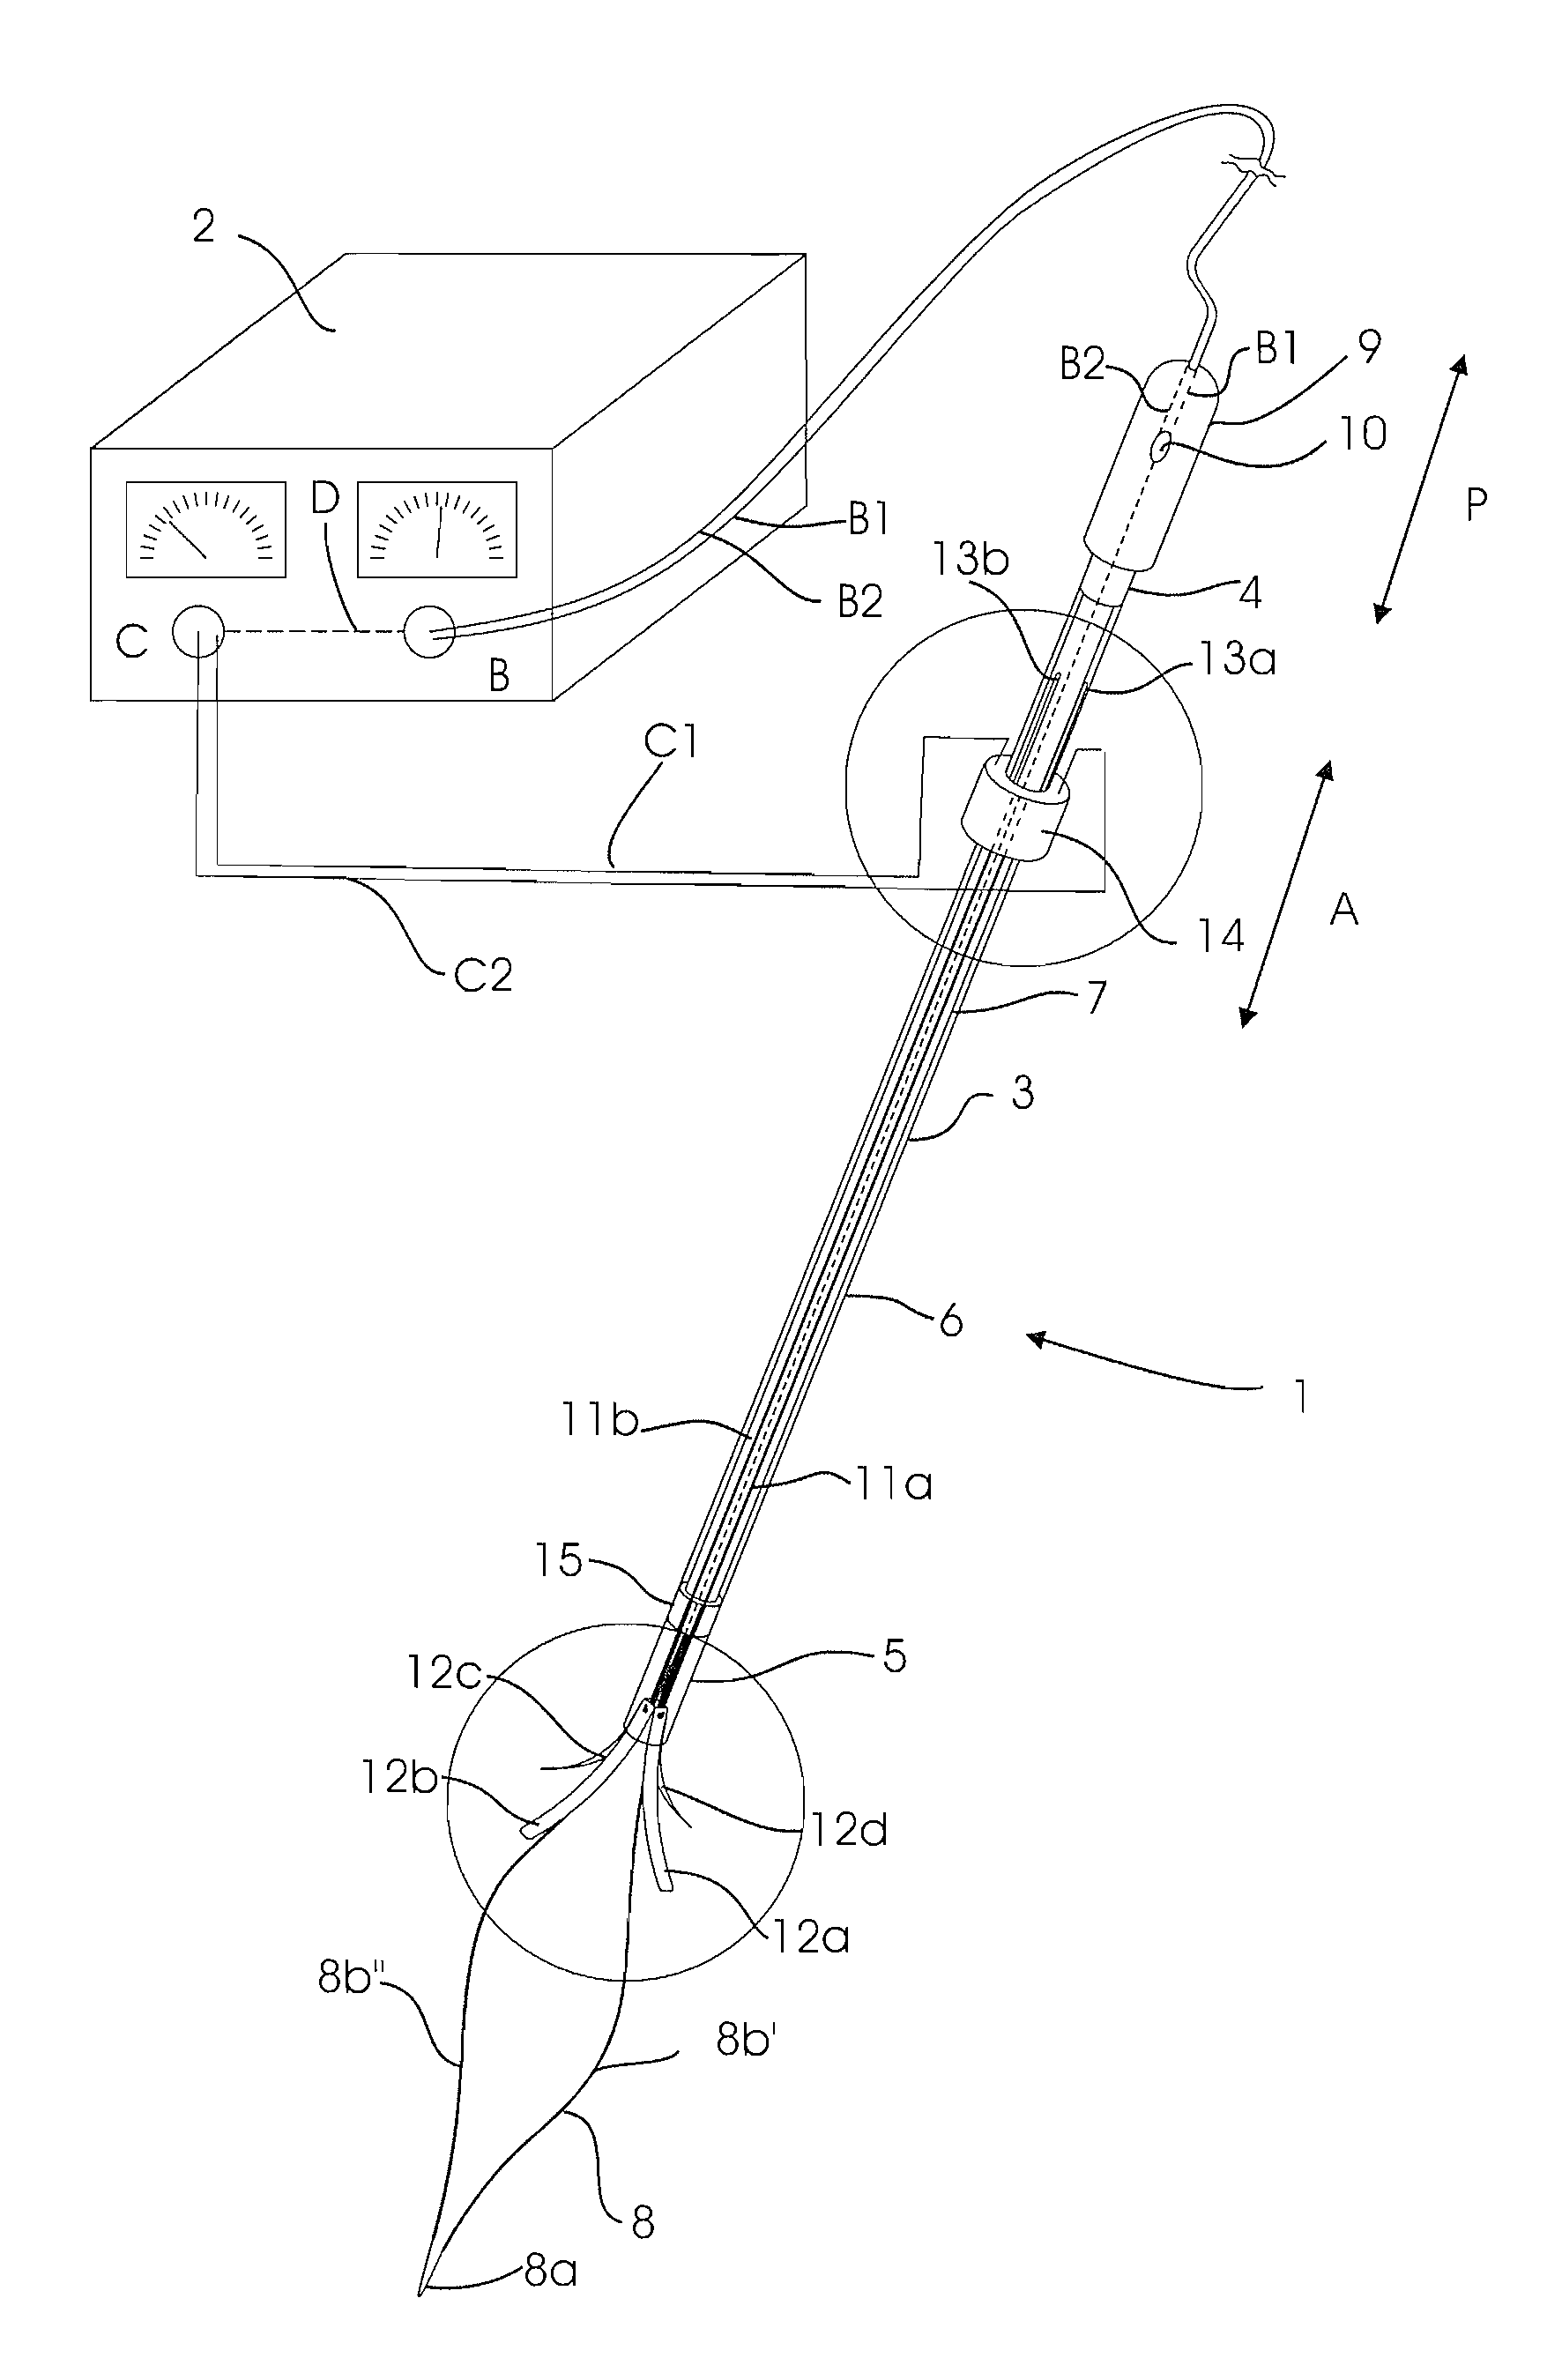 Bipolar electrosurgical instrument and method of using it